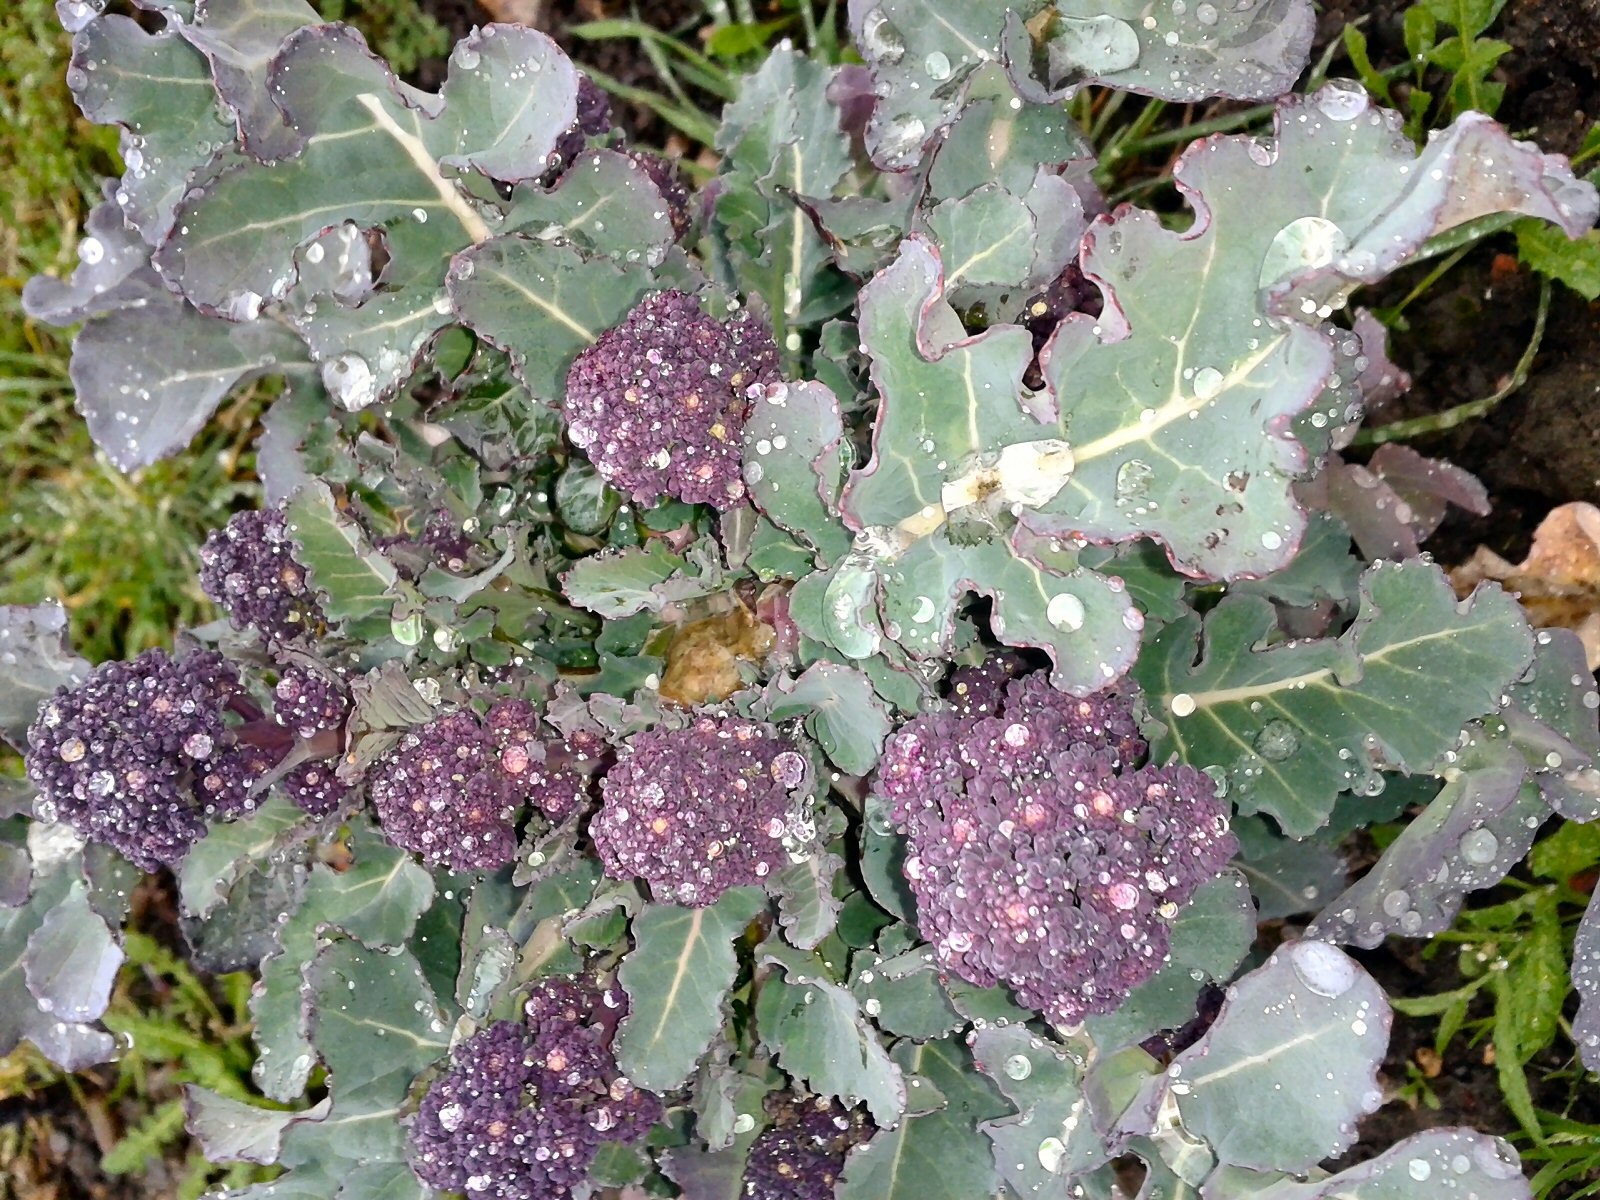 growing purple sprouting broccoli